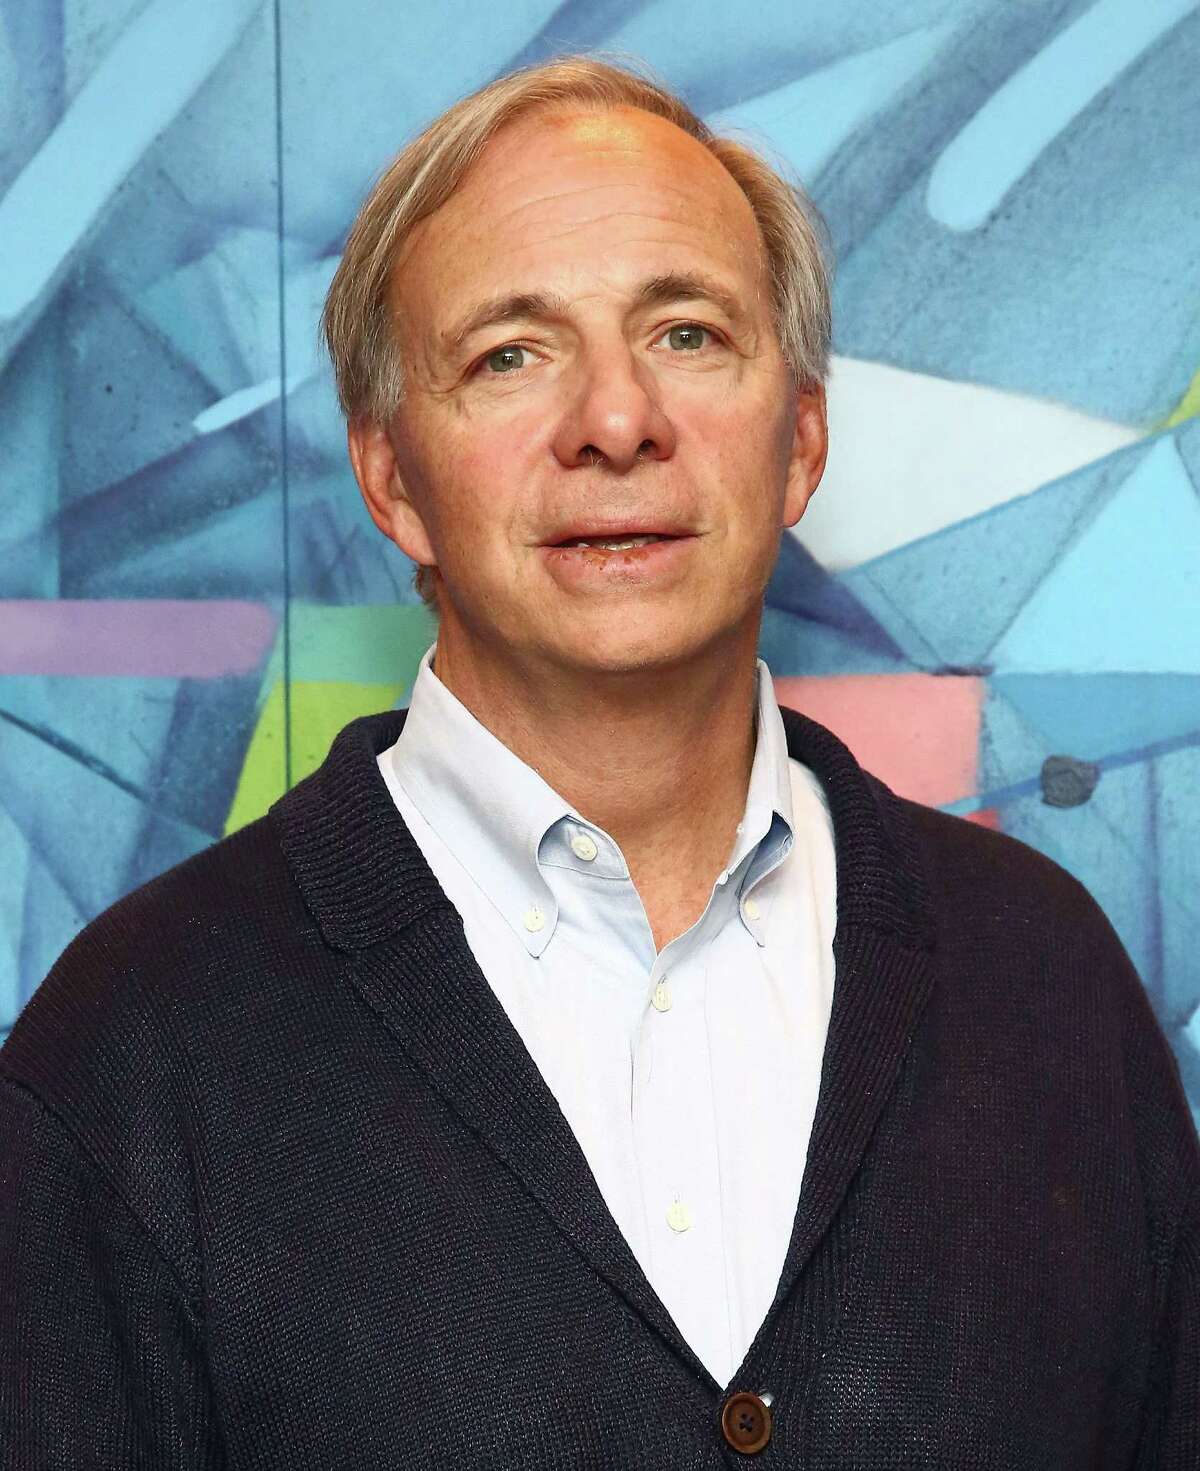 Bridgewater Associates founder Ray Dalio in April 2016 at the New York City offices of LinkedIn. (Photo by Astrid Stawiarz/Getty Images)